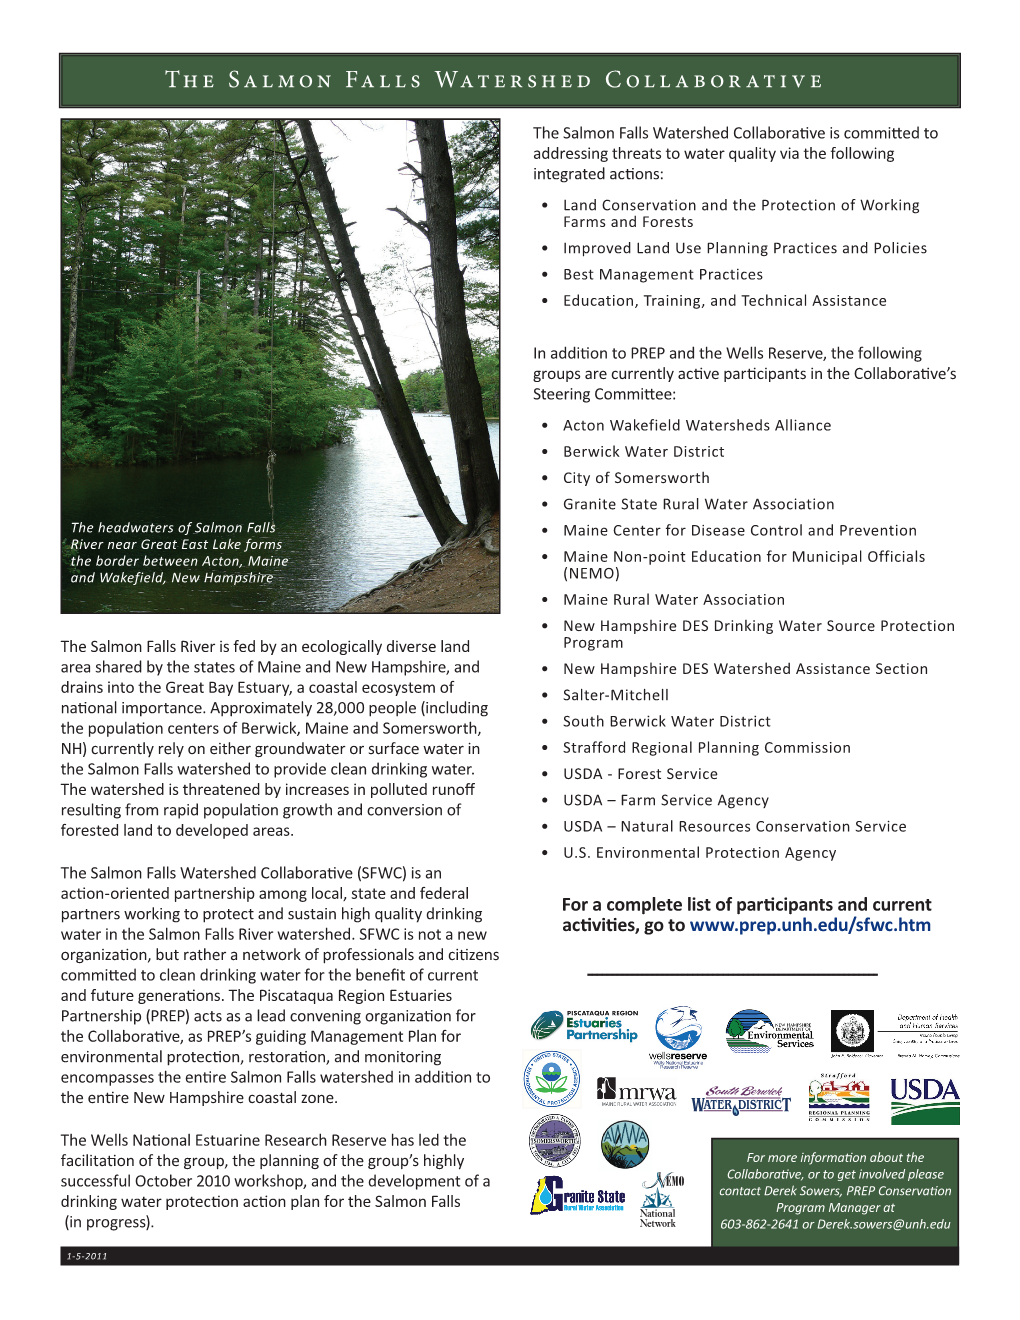 The Salmon Falls Watershed Collaborative